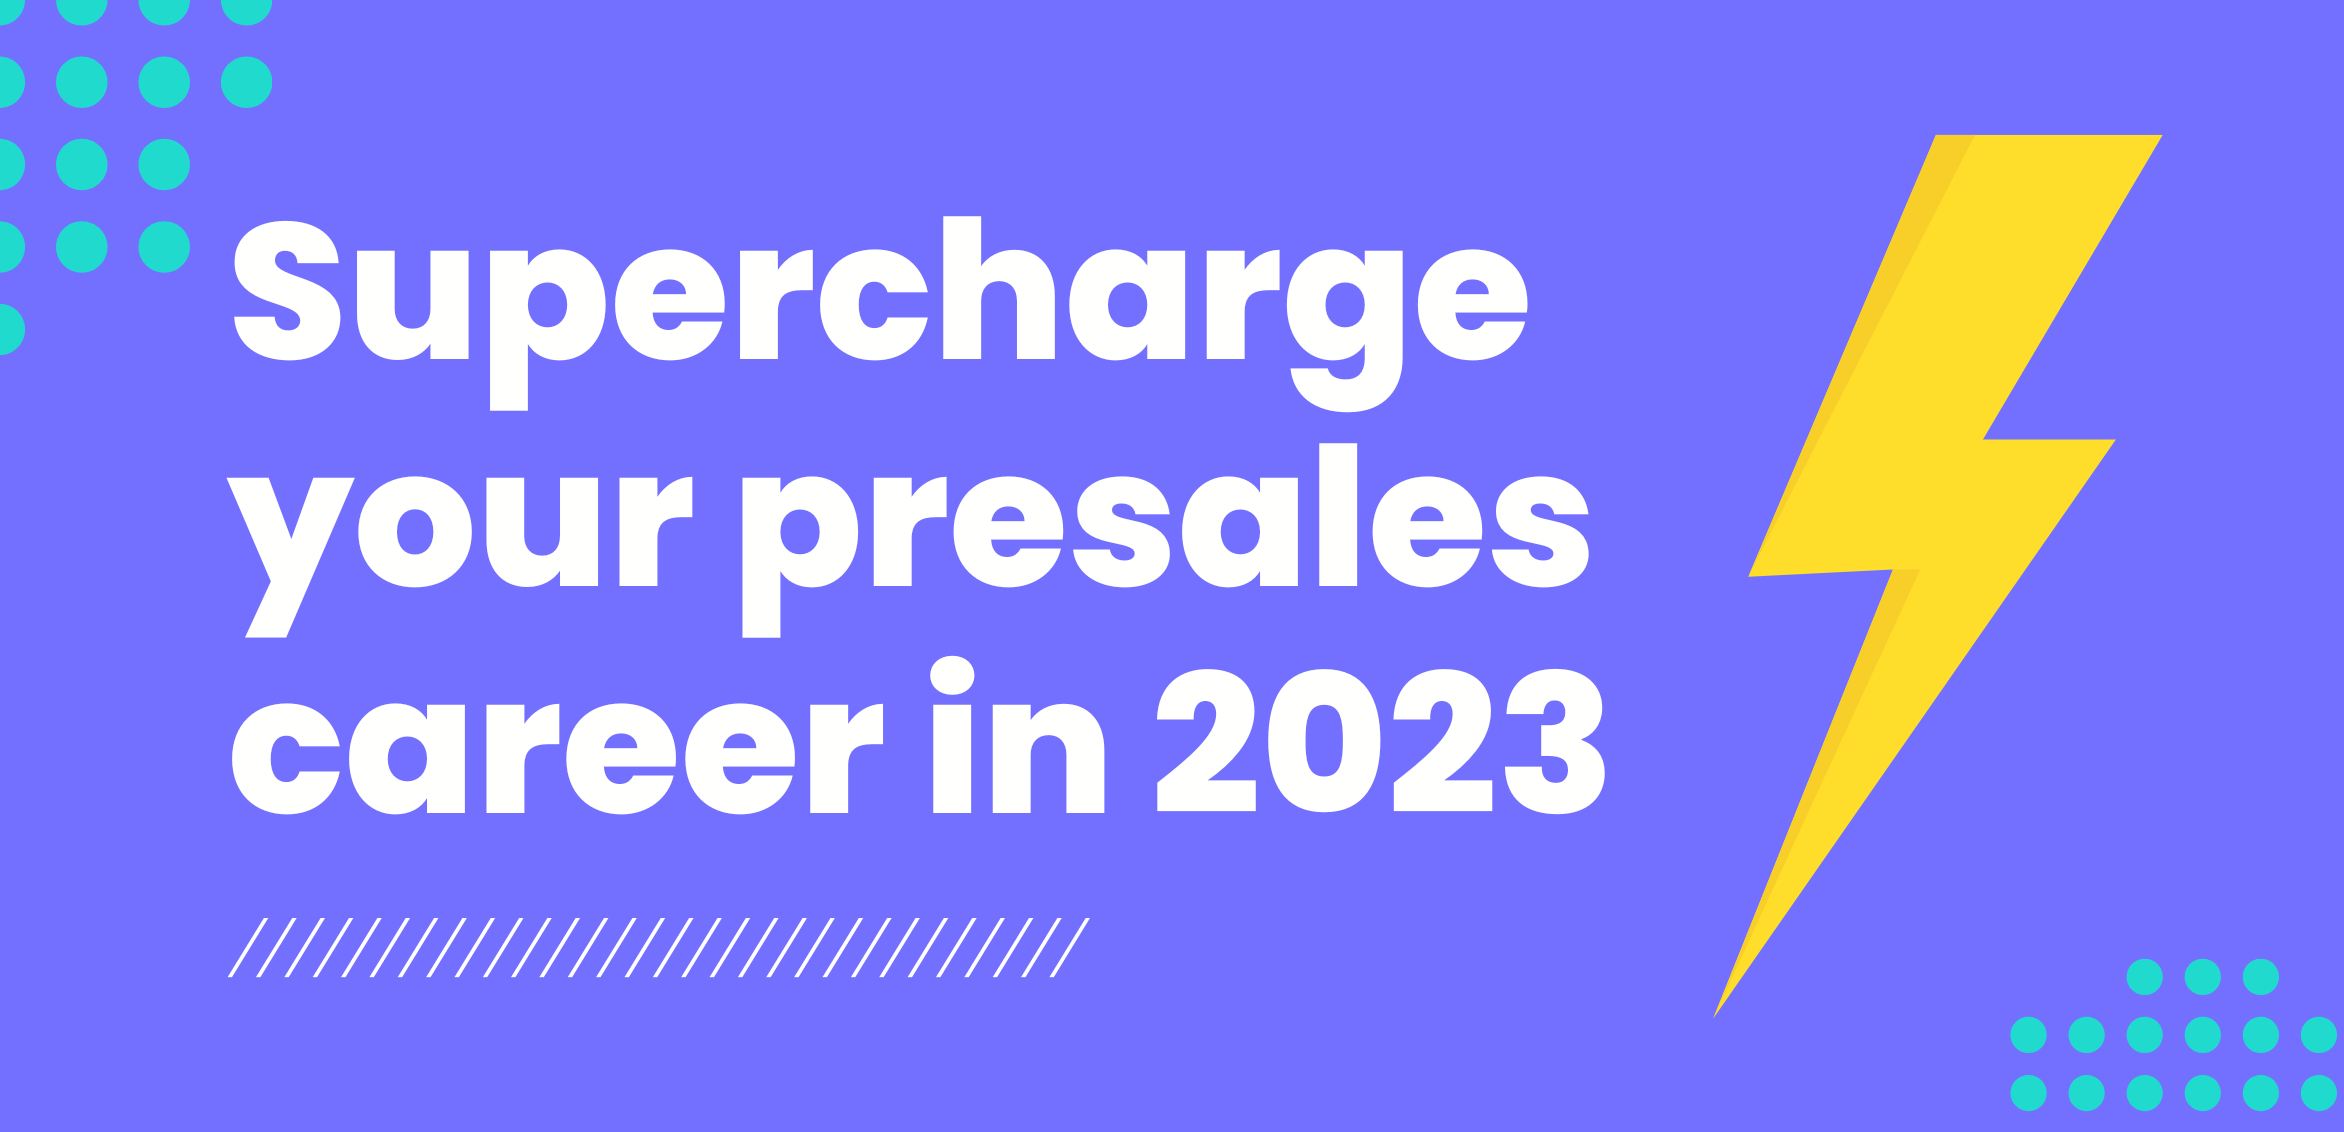 Supercharge your presales career in 2023: 3 tips from top SEs